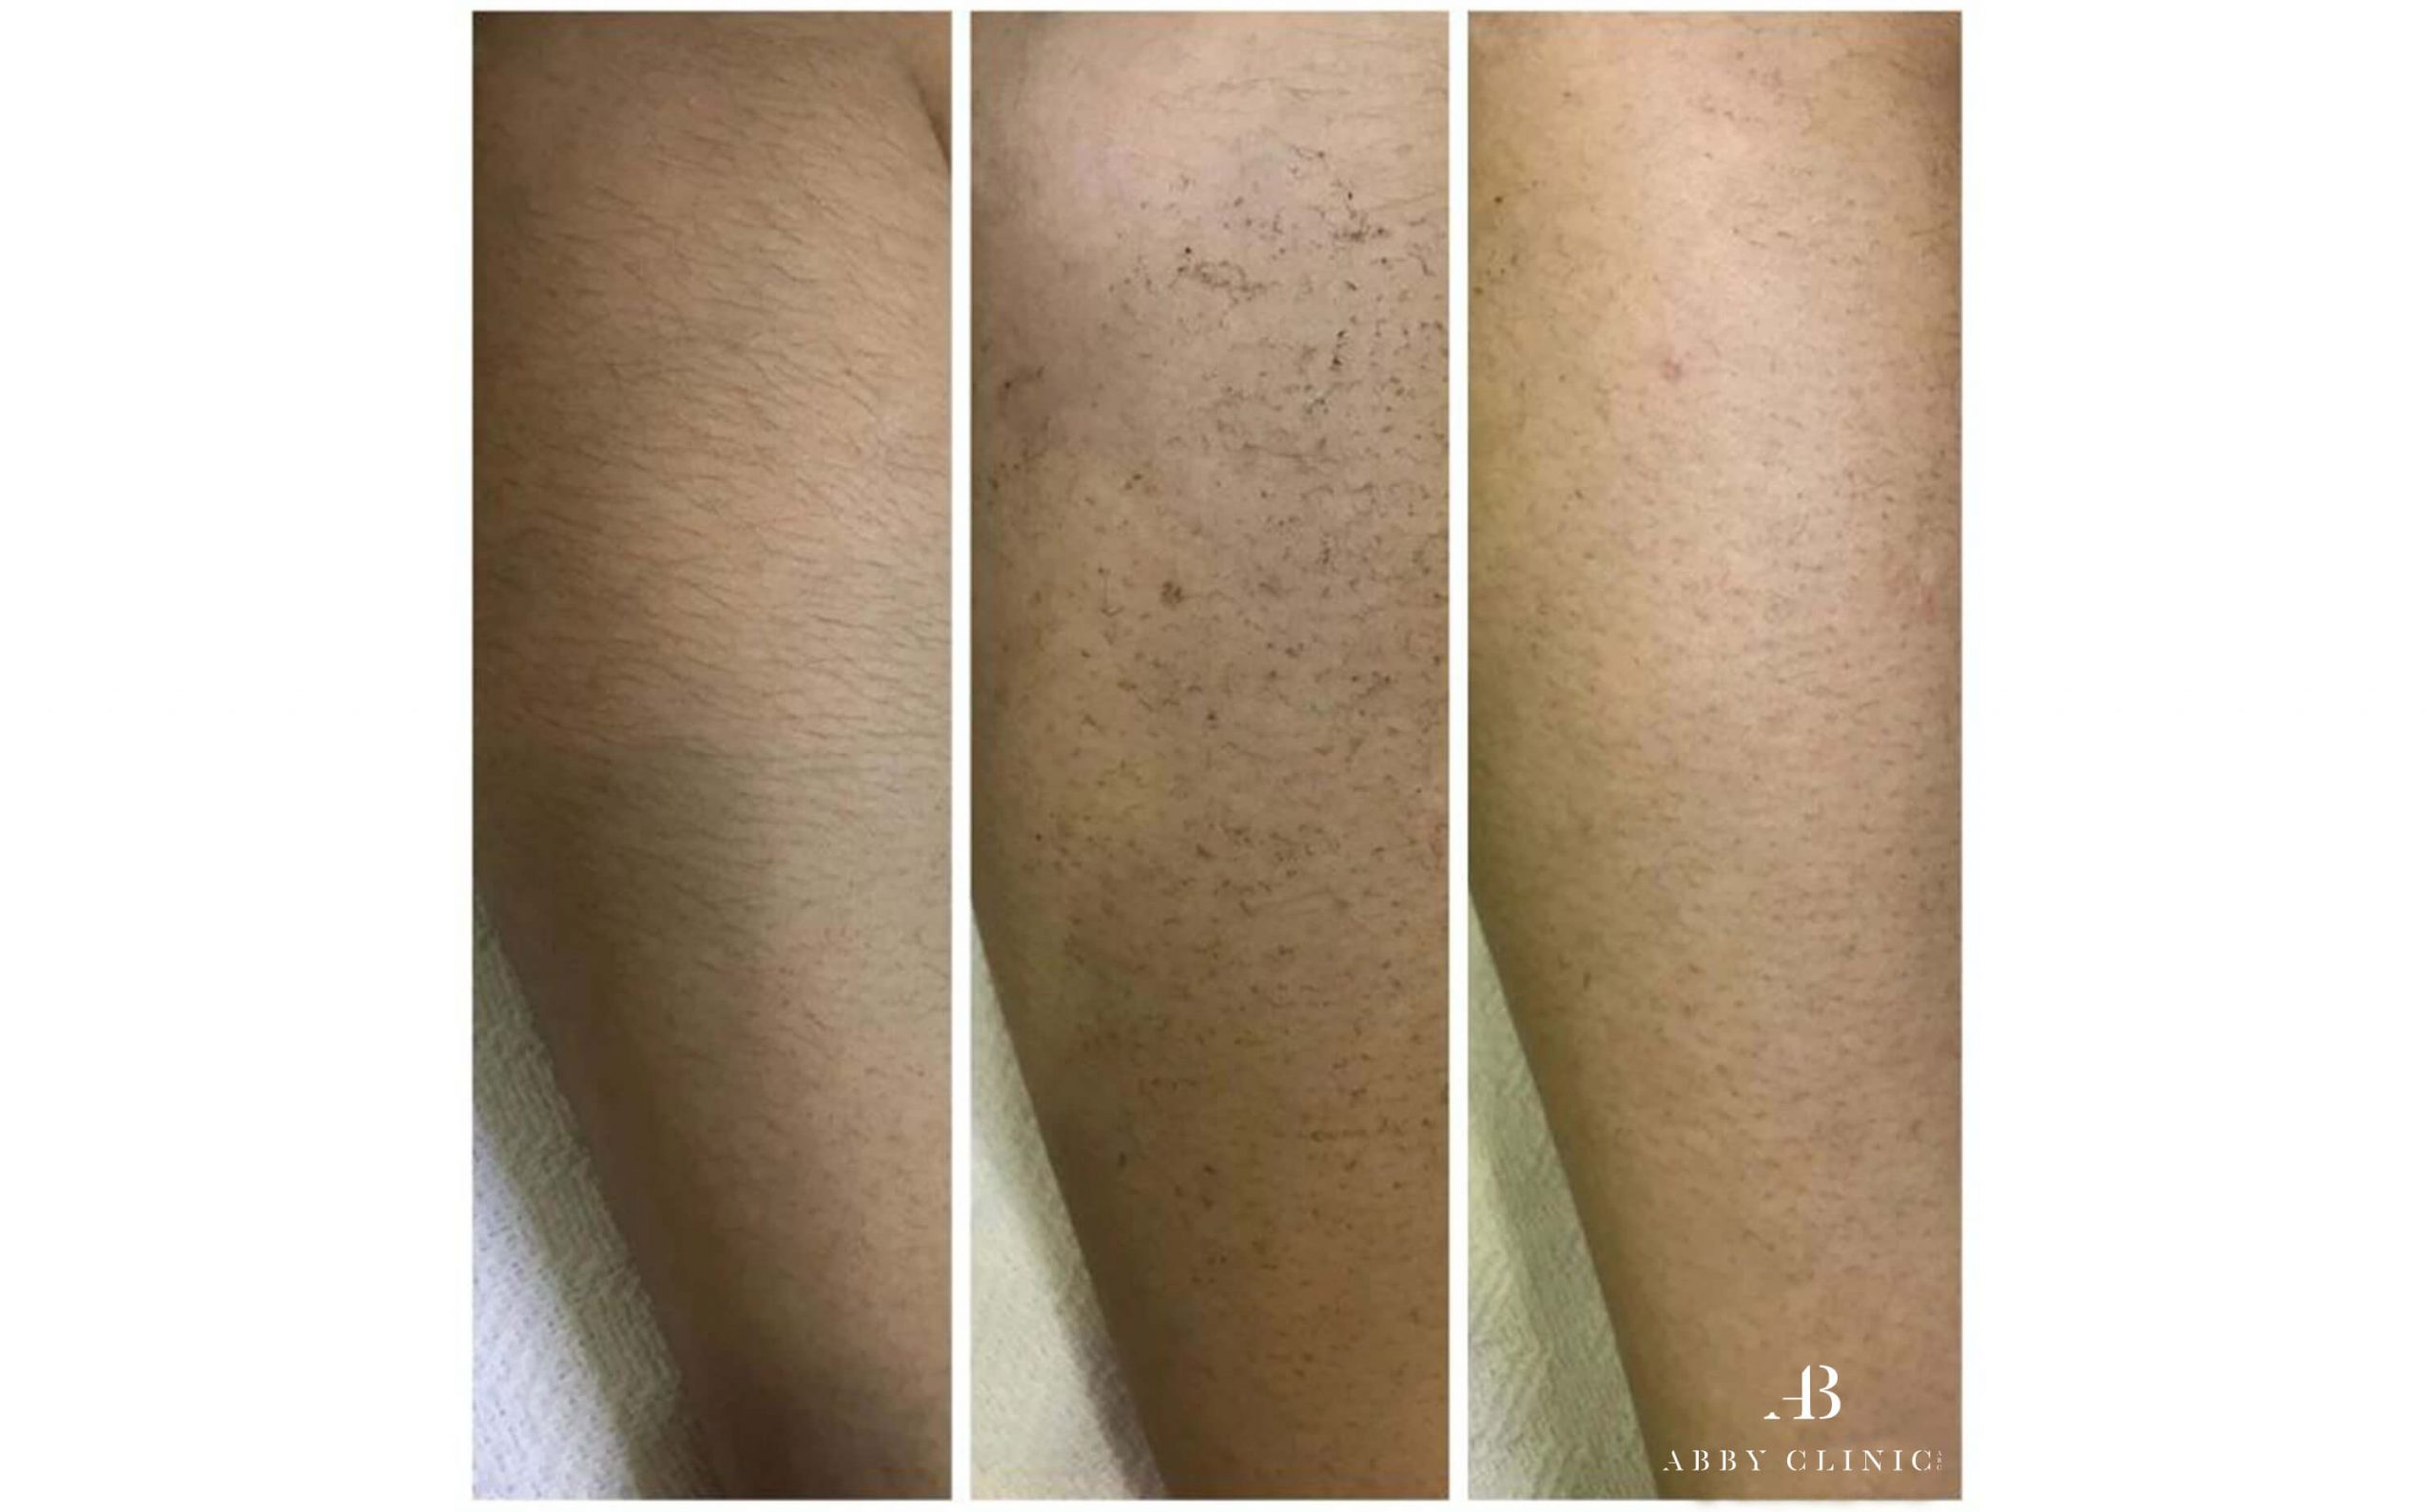 A comparison of before and after laser hair removal treatment at Abby Clinic.